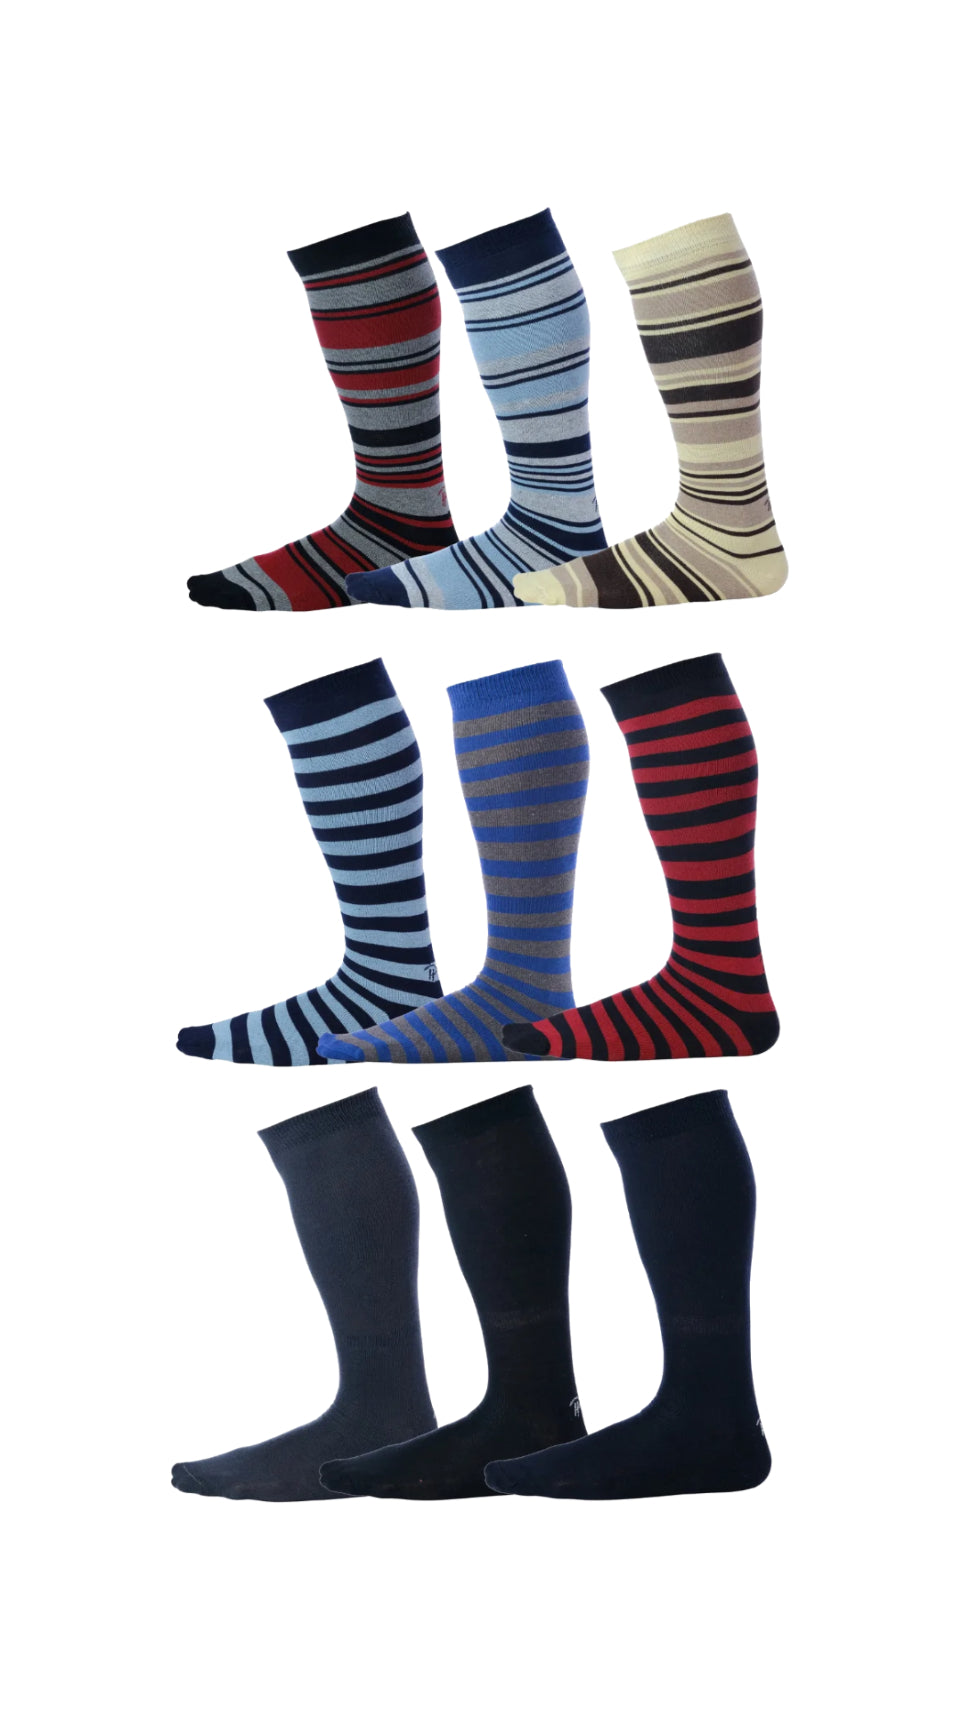 Solid and striped pairs of Pierre Henry Over the Calf Dress Socks